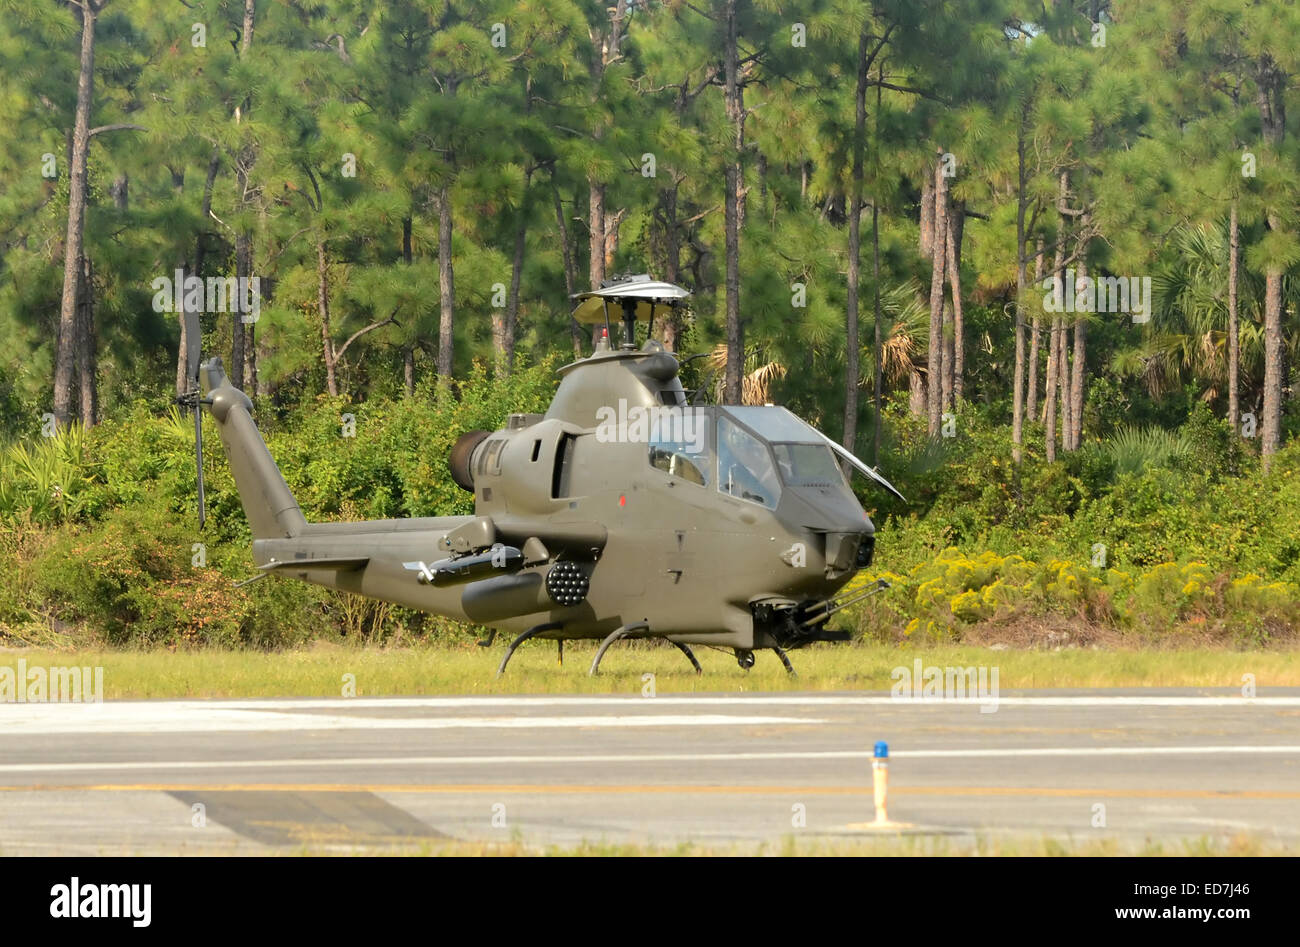 Military helicopter parked in front of trees Stock Photo